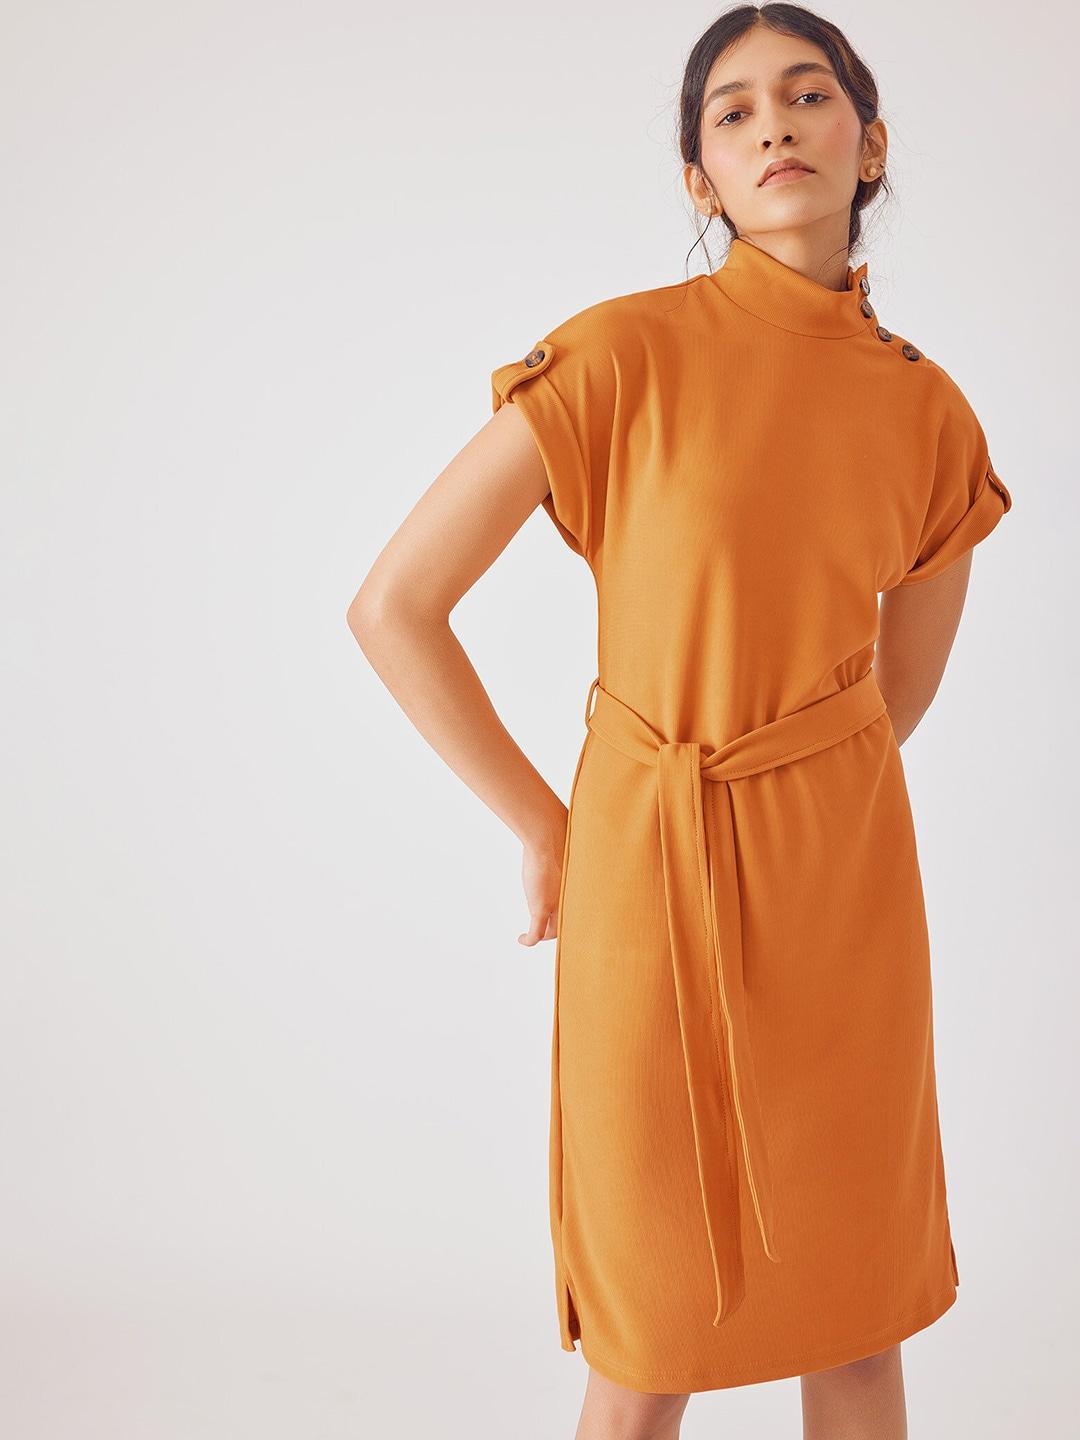 the-label-life-buttoned-high-neck-sheath-dress-with-belt